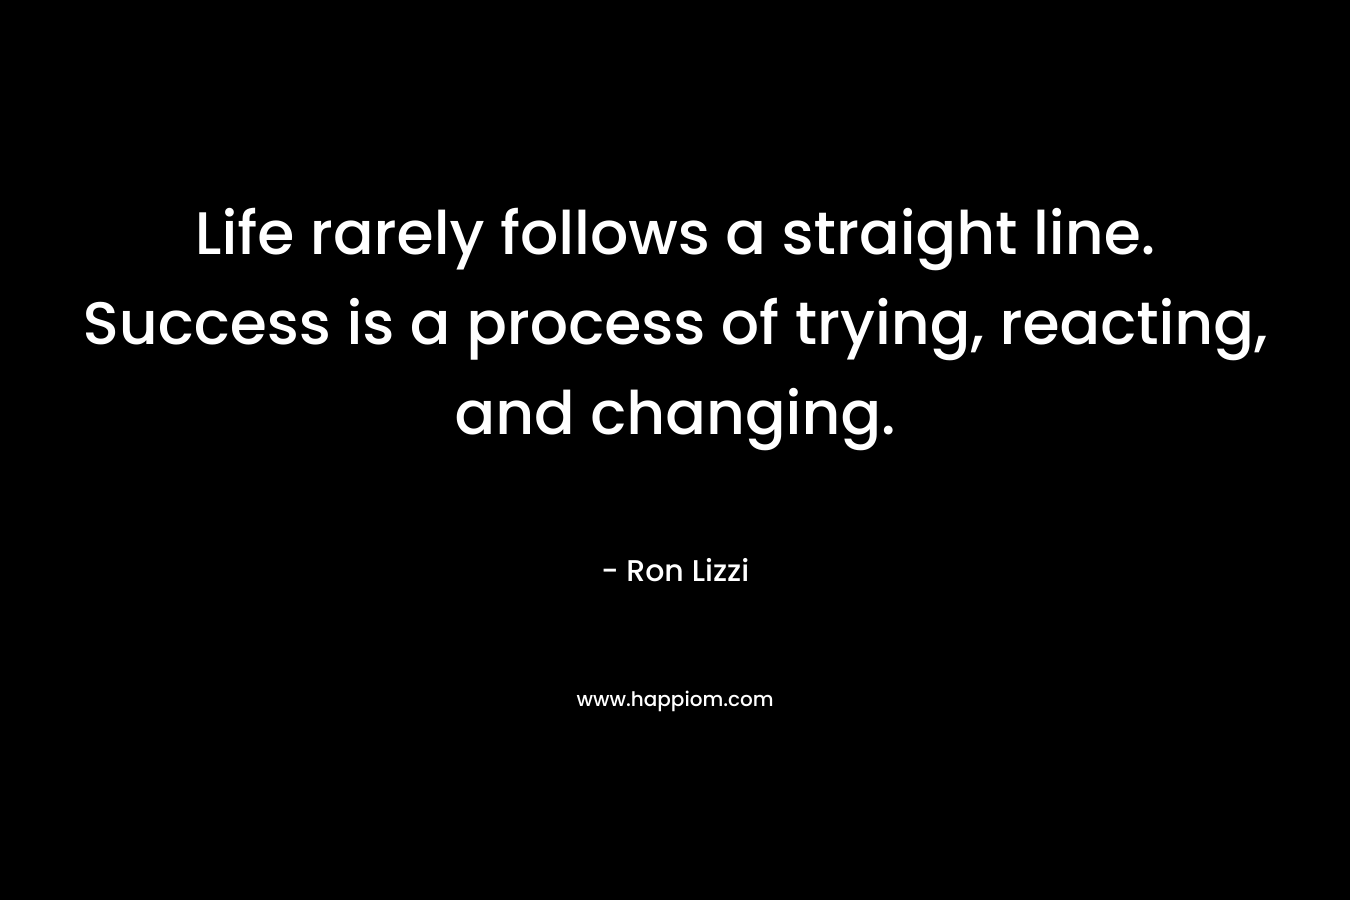 Life rarely follows a straight line. Success is a process of trying, reacting, and changing.